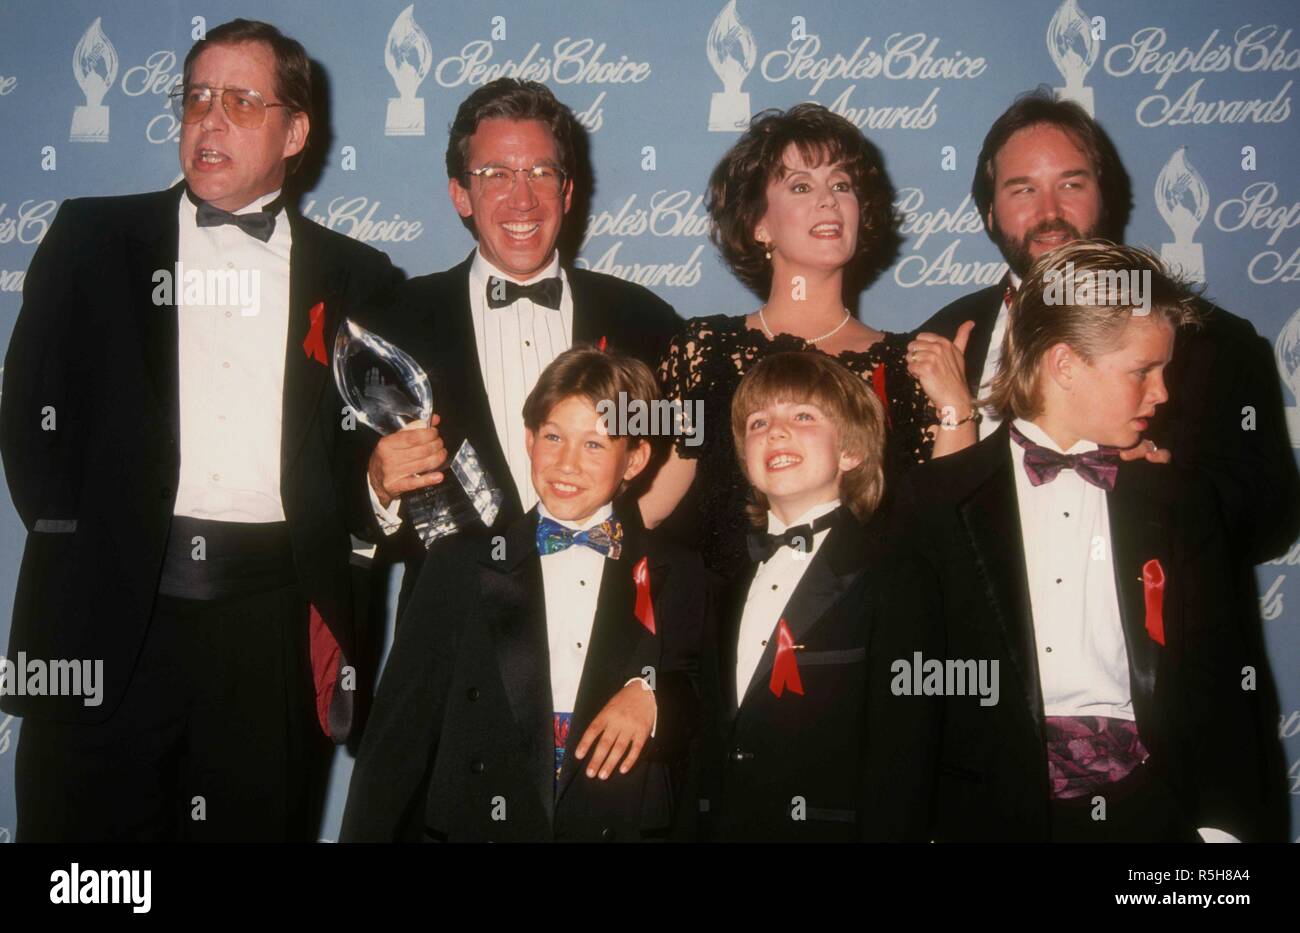 BEVERLY HILLS, CA - MARCH 17: (L-R) Actors Earl Hindman, Tim Allen, Patricia Richardson, Pamela Anderson, Richard Kam (back row) and Taran Noah Smith, Jonathan Taylor Thomas and Zachery Ty Bryan (front)attends the 18th Annual People's Choice Awards on March 17, 1992 at Universal Studios in Universal City, California. Photo by Barry King/Alamy Stock Photo Stock Photo